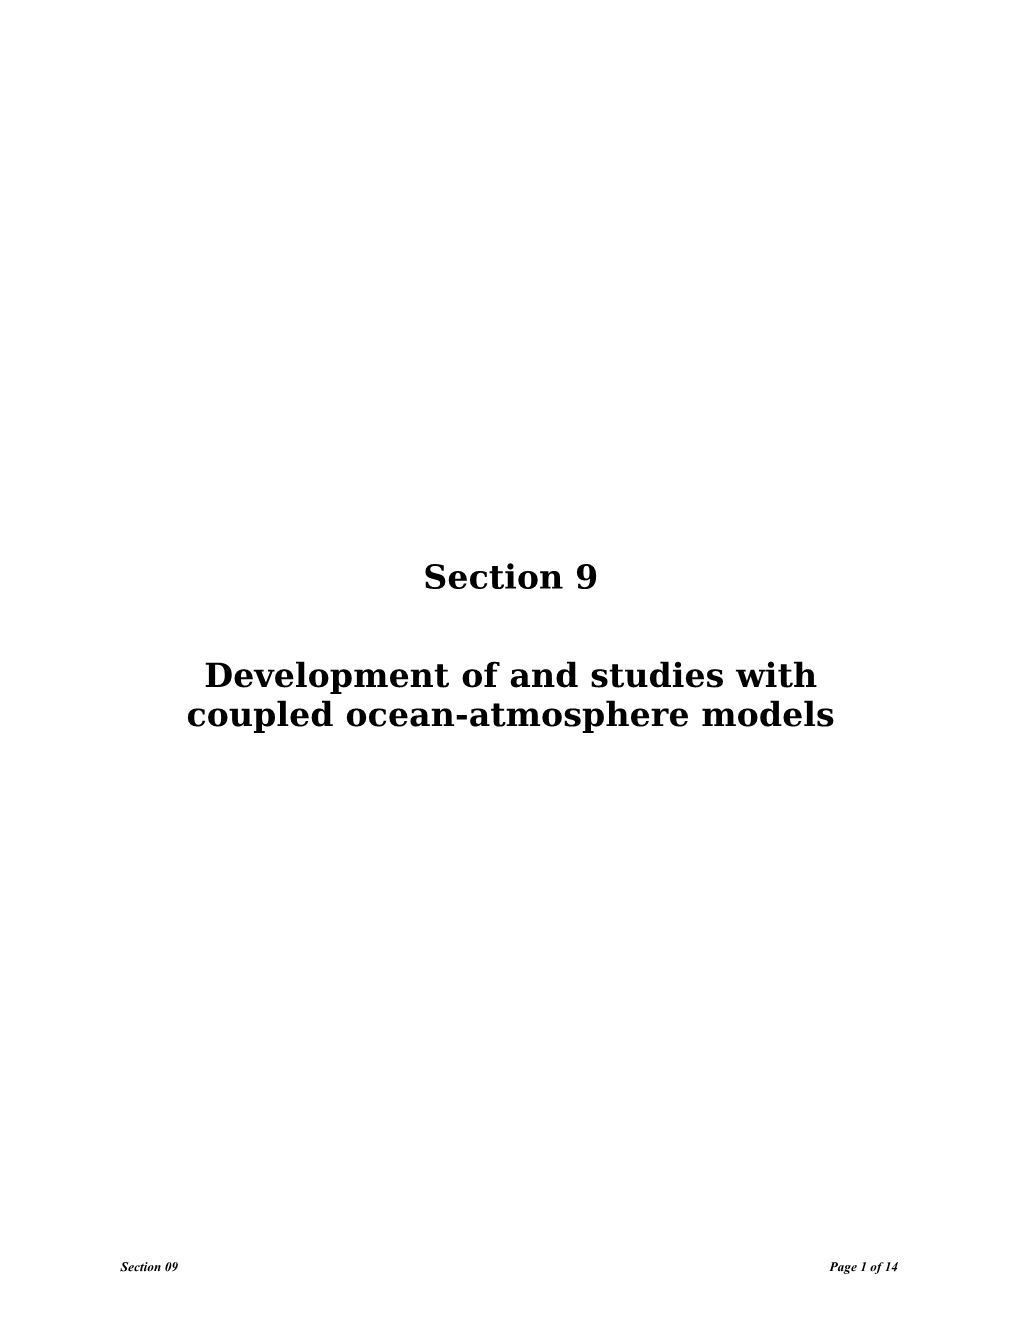 Section 9 Development of and Studies with Coupled Ocean